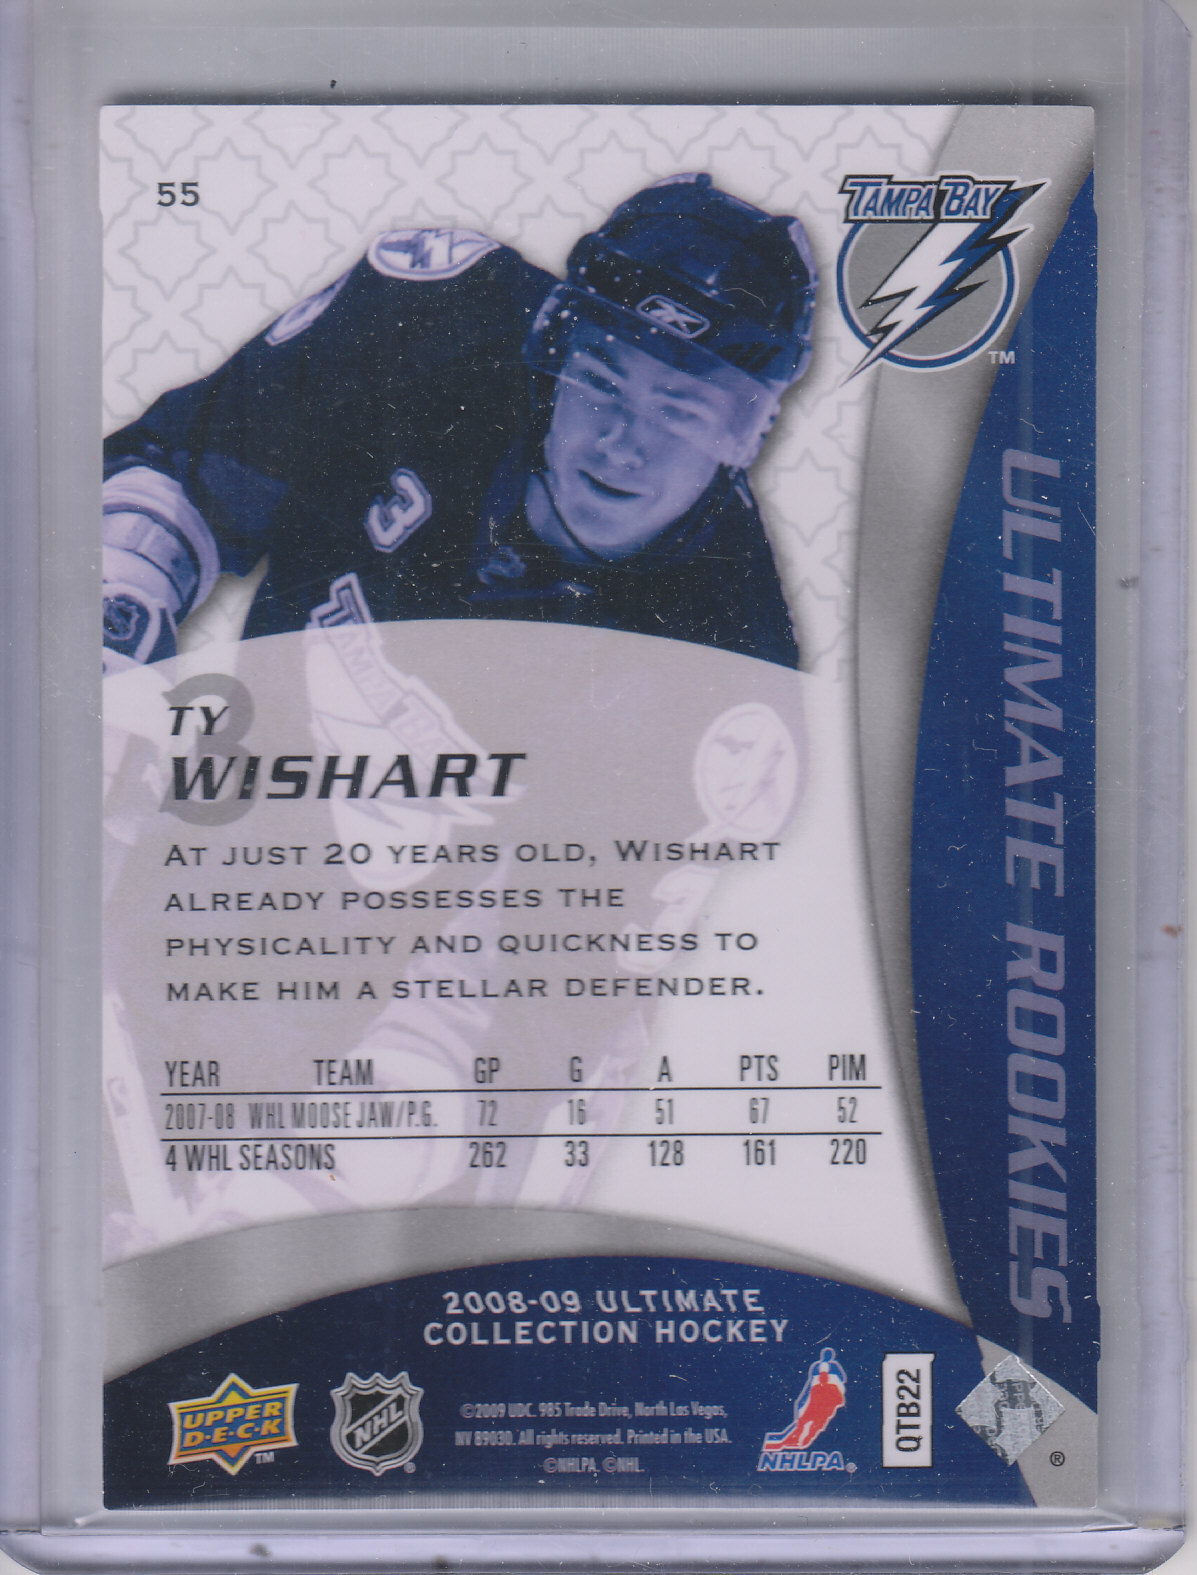 2008-09 Ultimate Collection #55 Ty Wishart RC back image